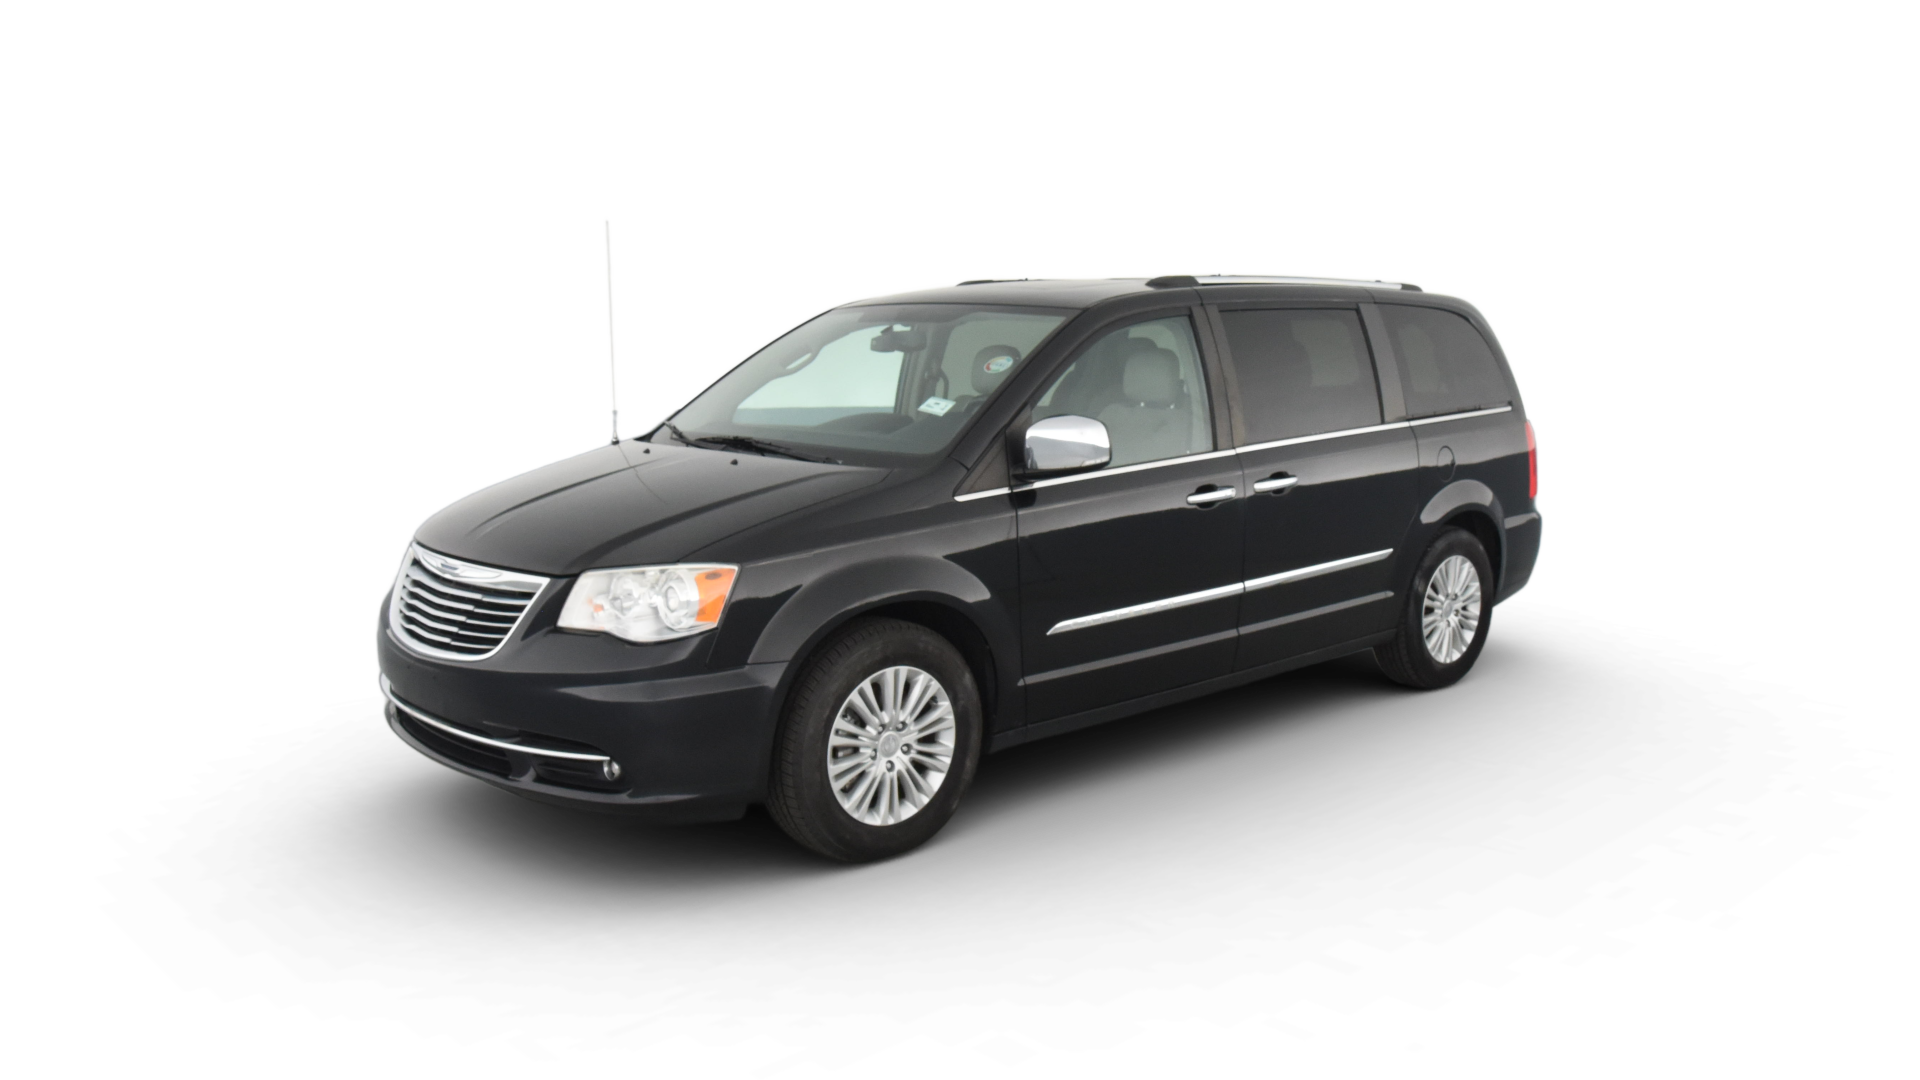 Chrysler Town & Country model image.